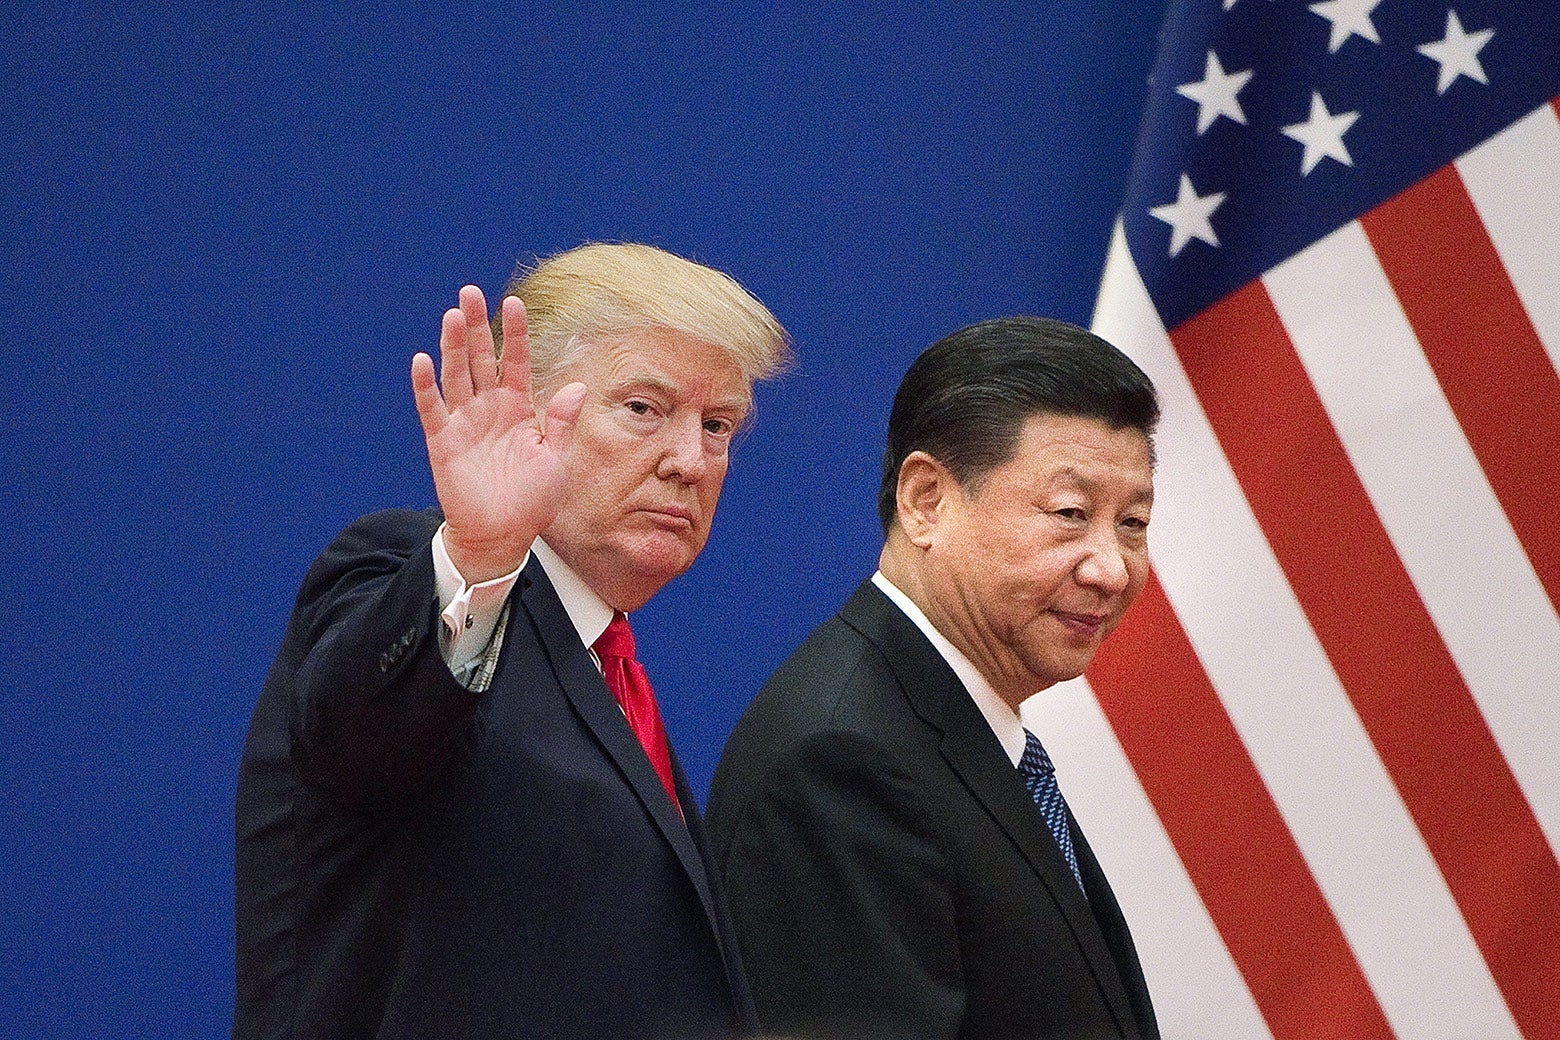 Trump and Xi walking by an American flag. Trump waves to the camera.